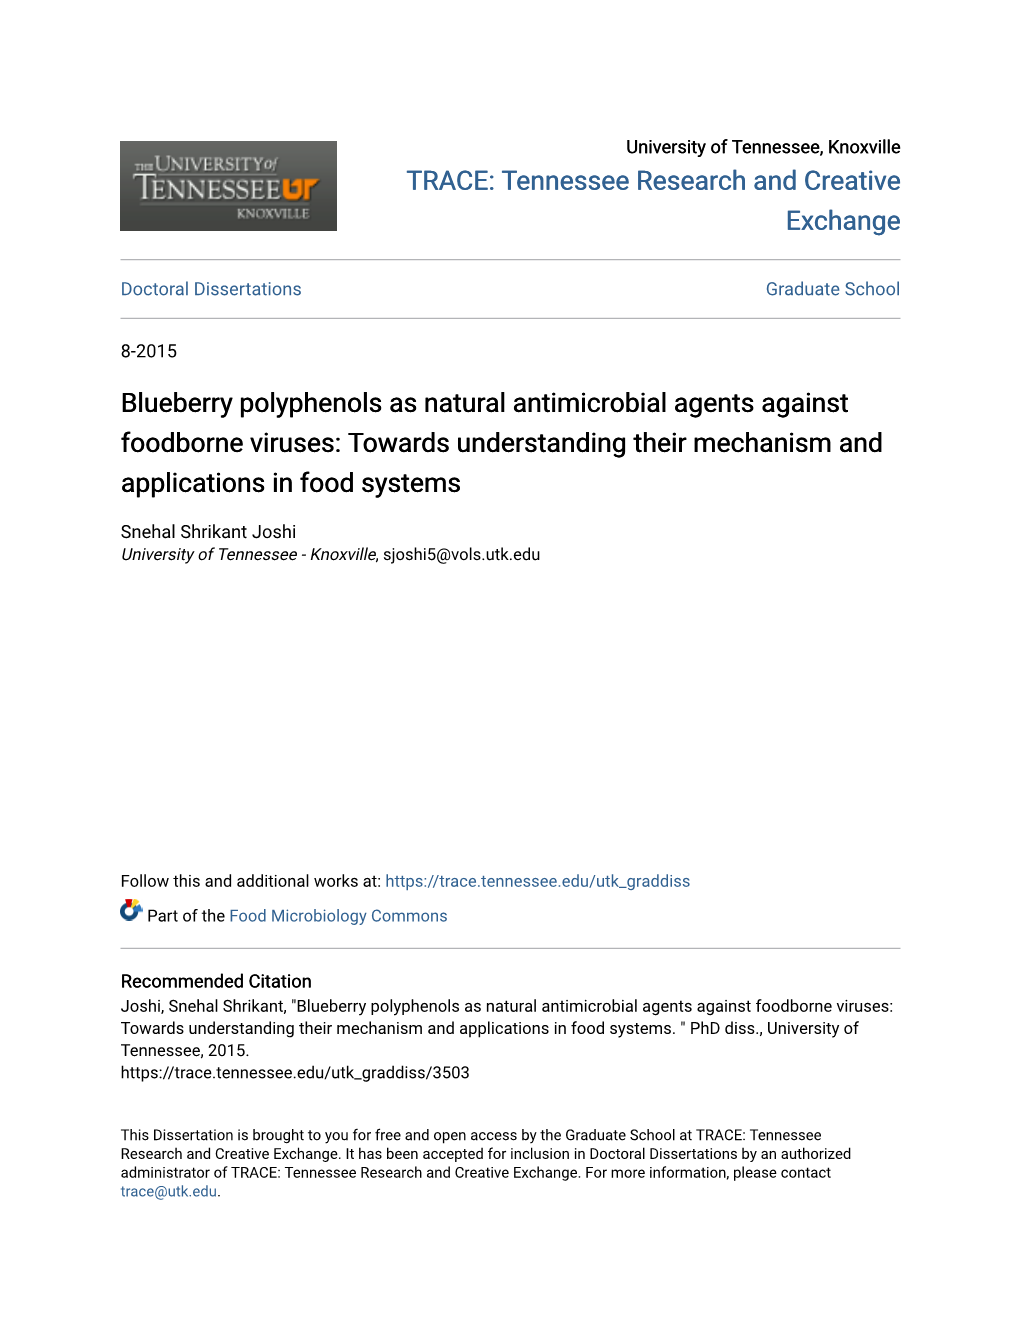 Blueberry Polyphenols As Natural Antimicrobial Agents Against Foodborne Viruses: Towards Understanding Their Mechanism and Applications in Food Systems